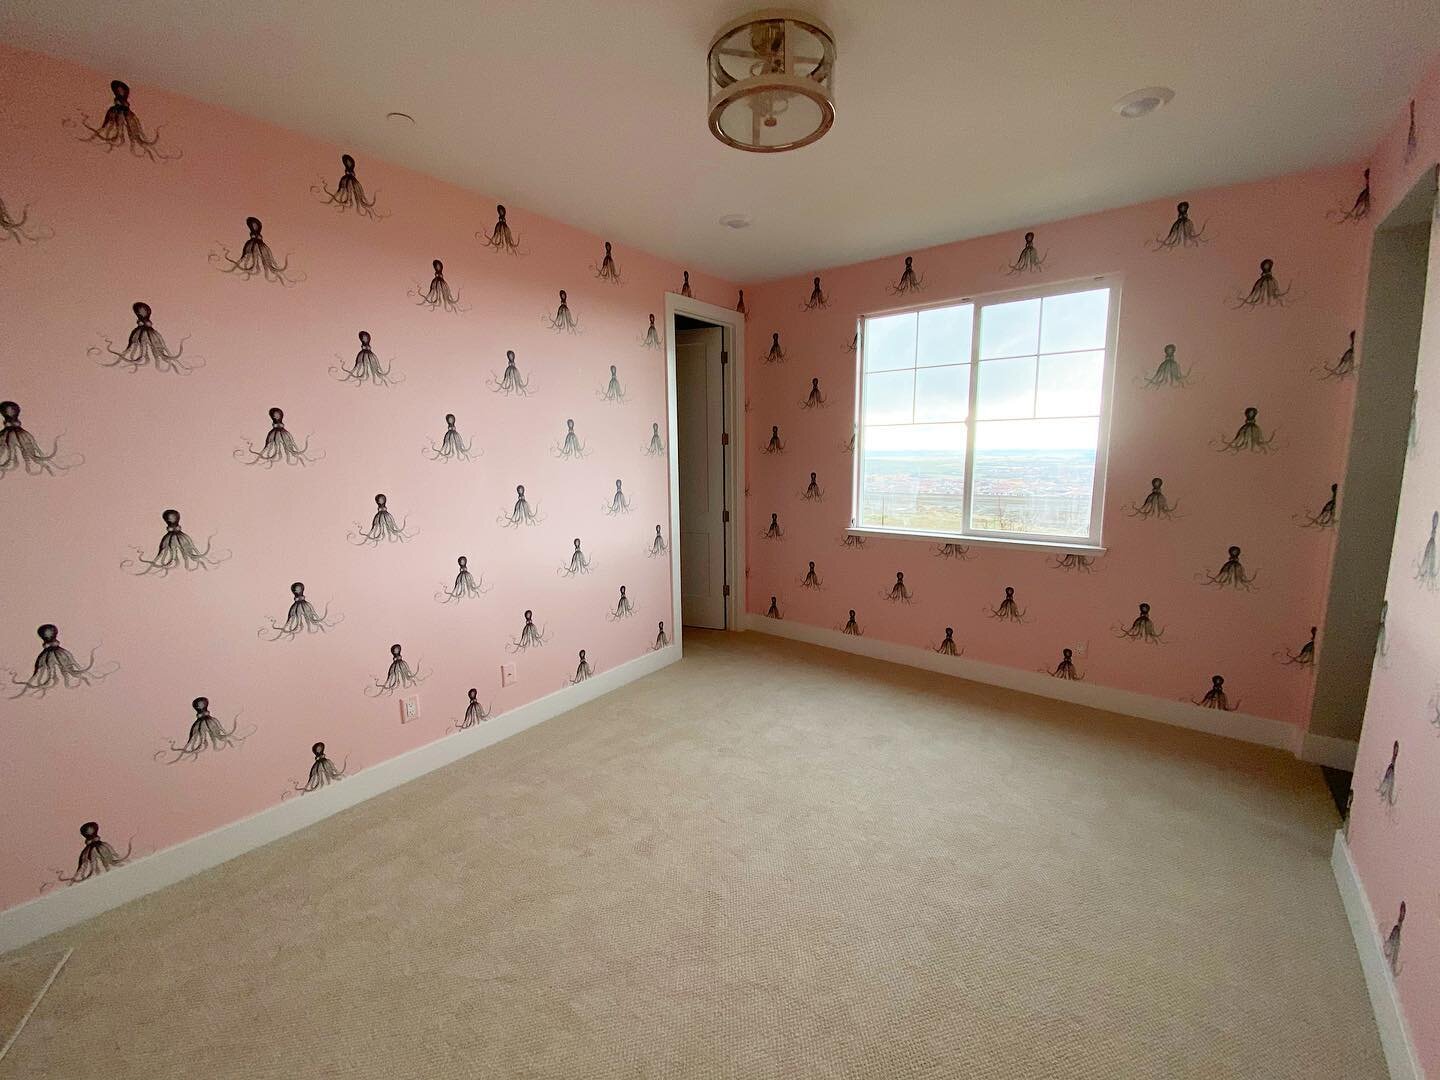 Jobs like this make us very grateful for our laser level! The horizontal came in very handy to make sure all the little octopi stayed in line. This was a hand trim wallpaper designed to overlap and double cut. However, the vertical match failed so we